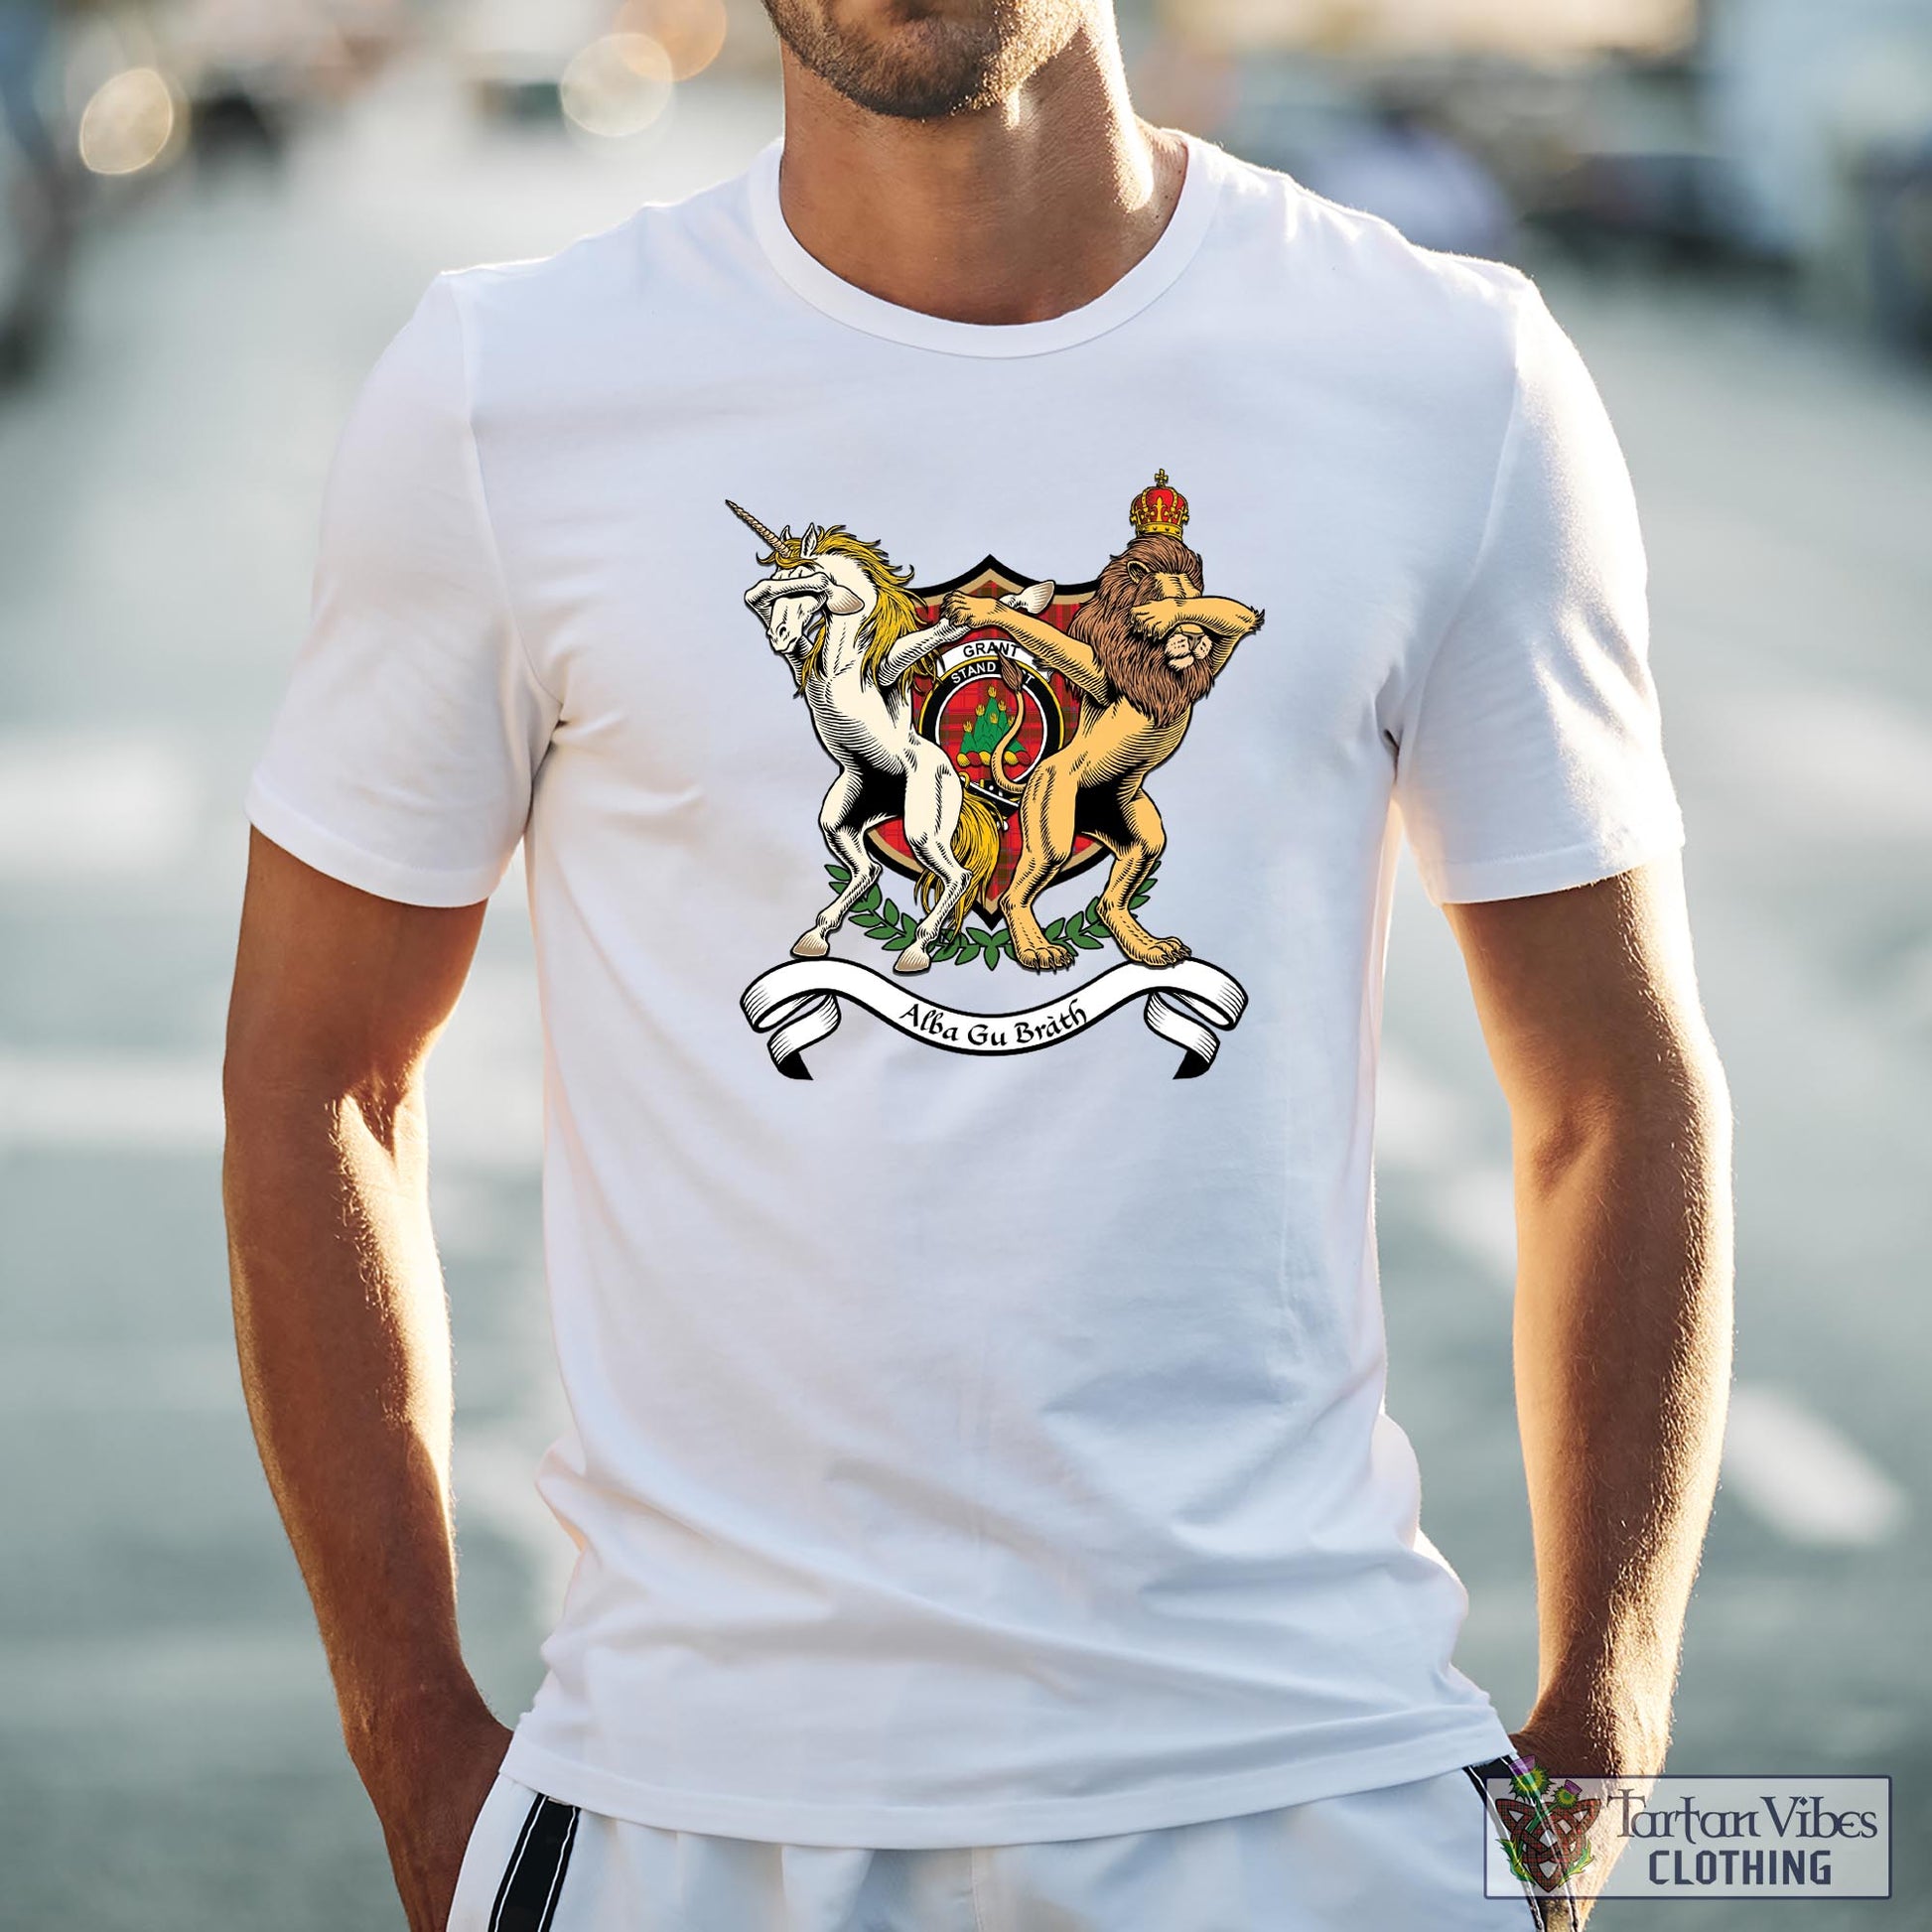 Tartan Vibes Clothing Grant Weathered Family Crest Cotton Men's T-Shirt with Scotland Royal Coat Of Arm Funny Style